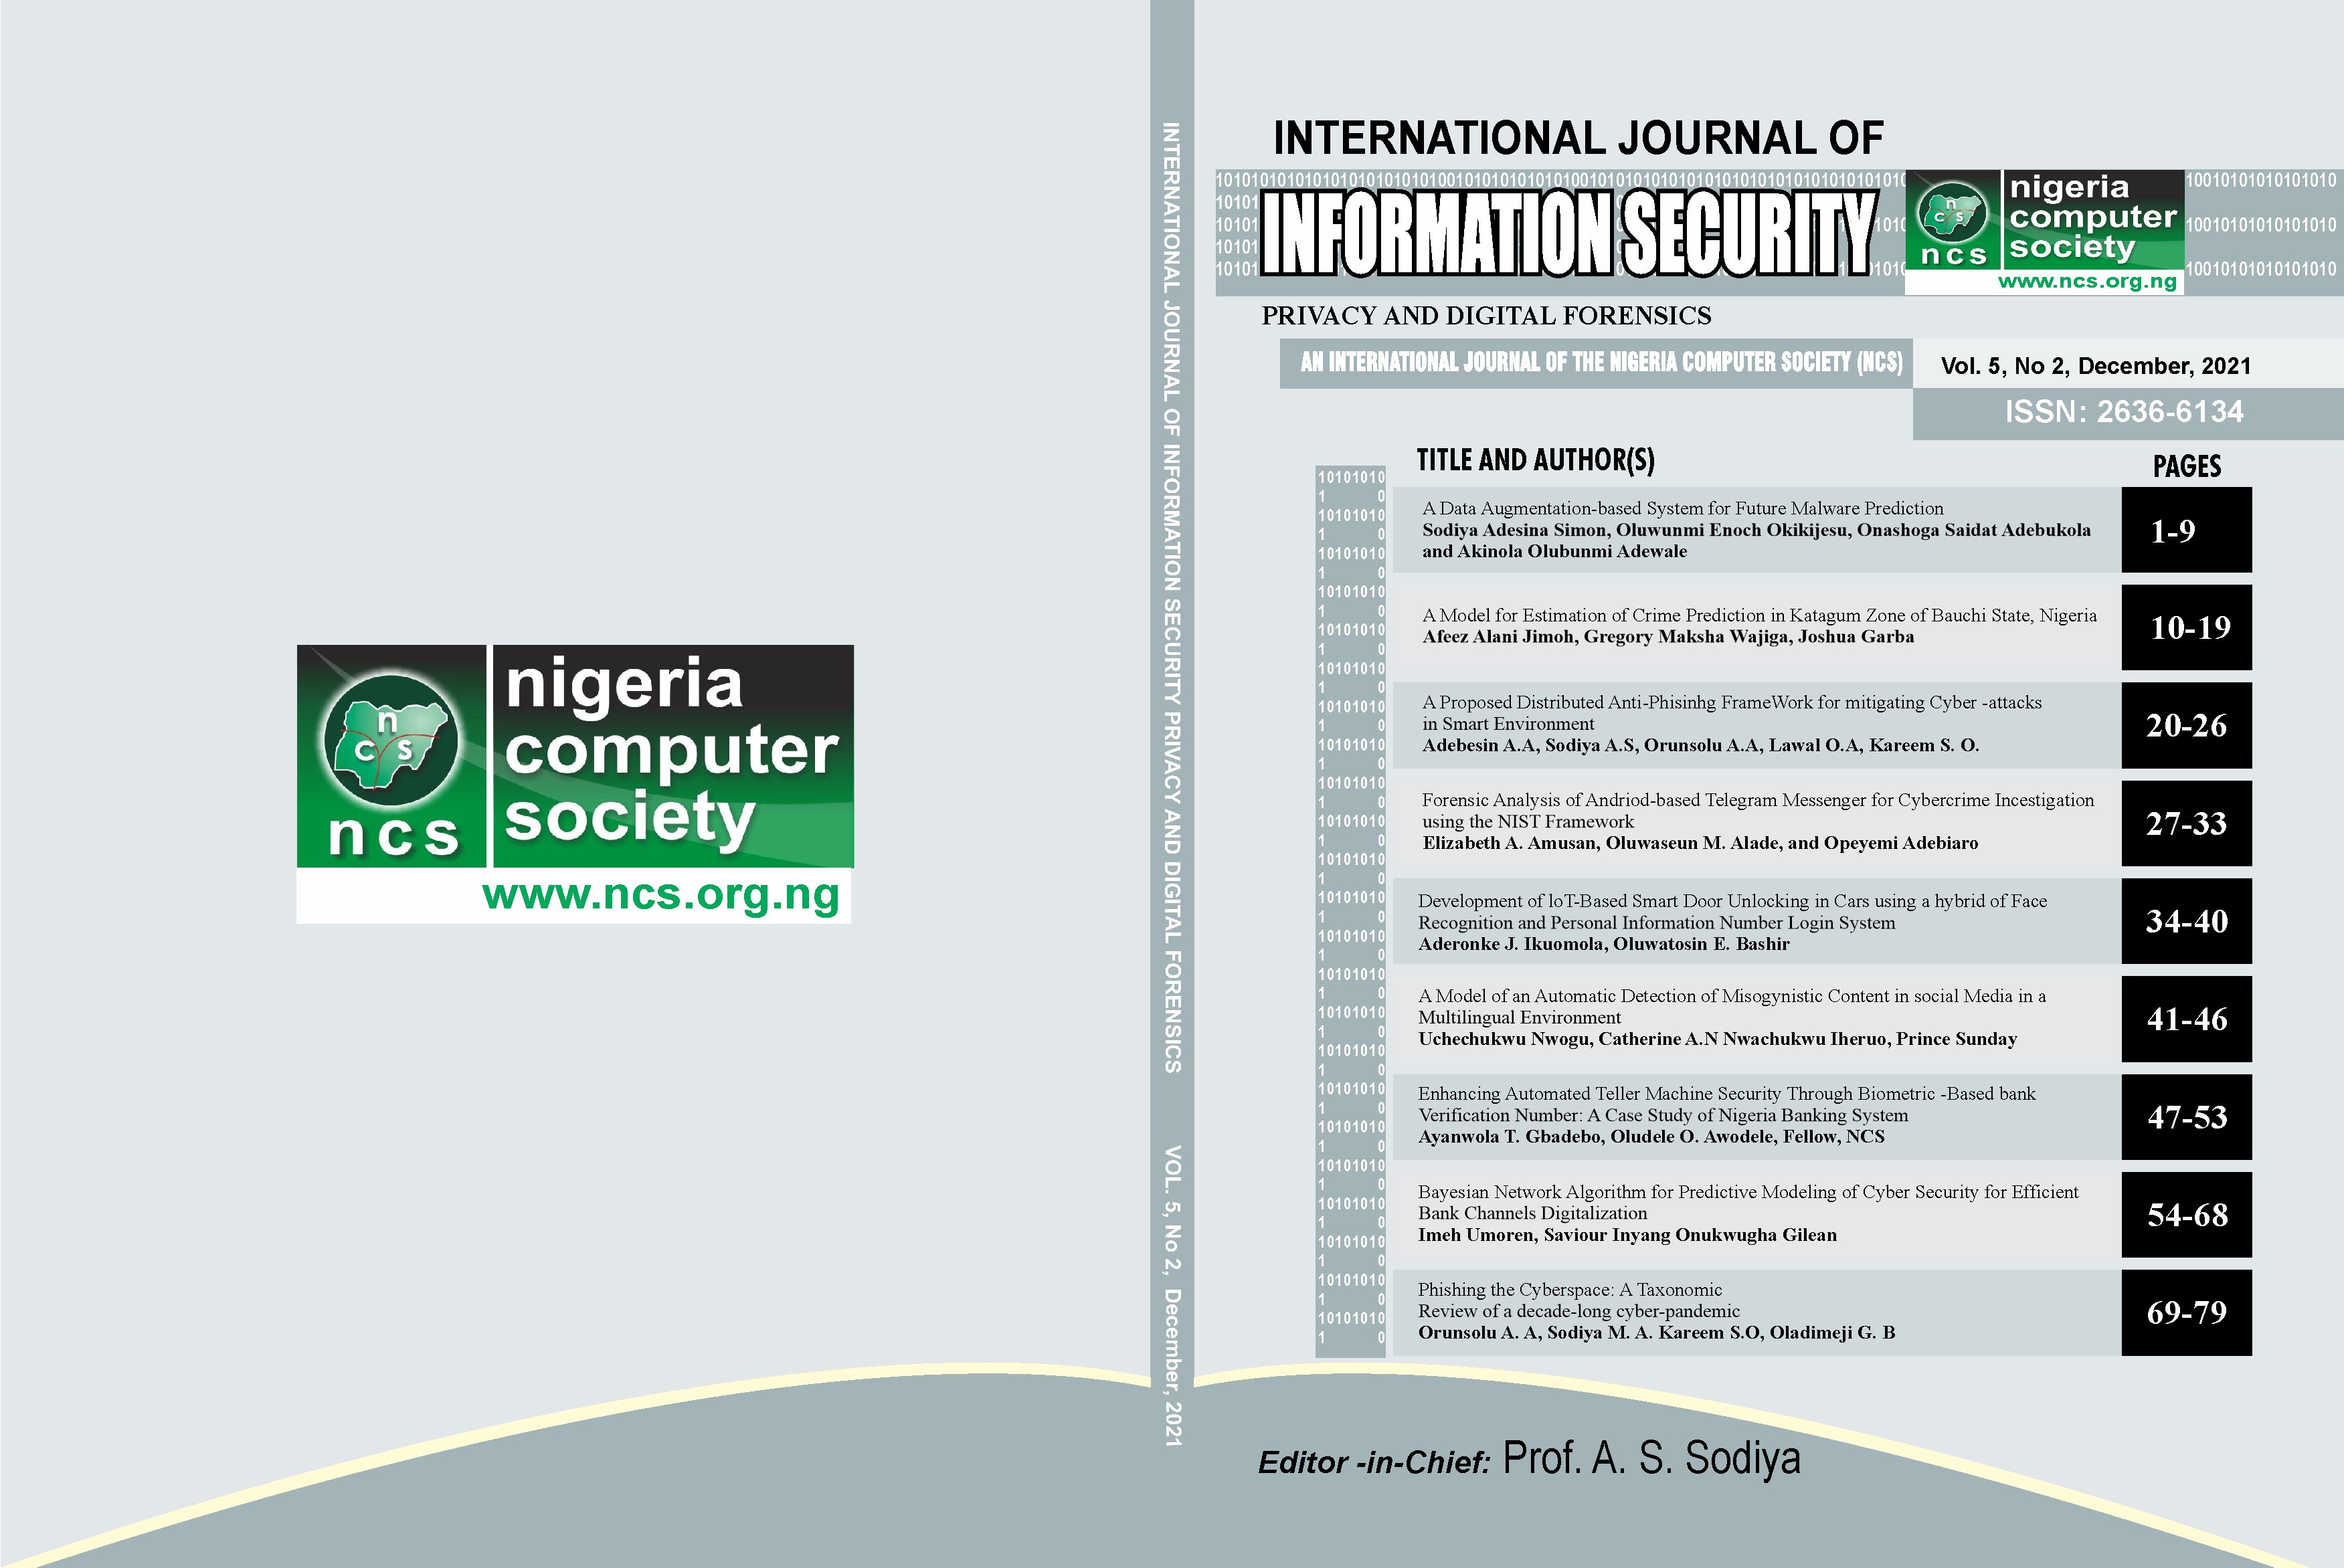 International Journal of Information Security, Privacy and Digital Forensics